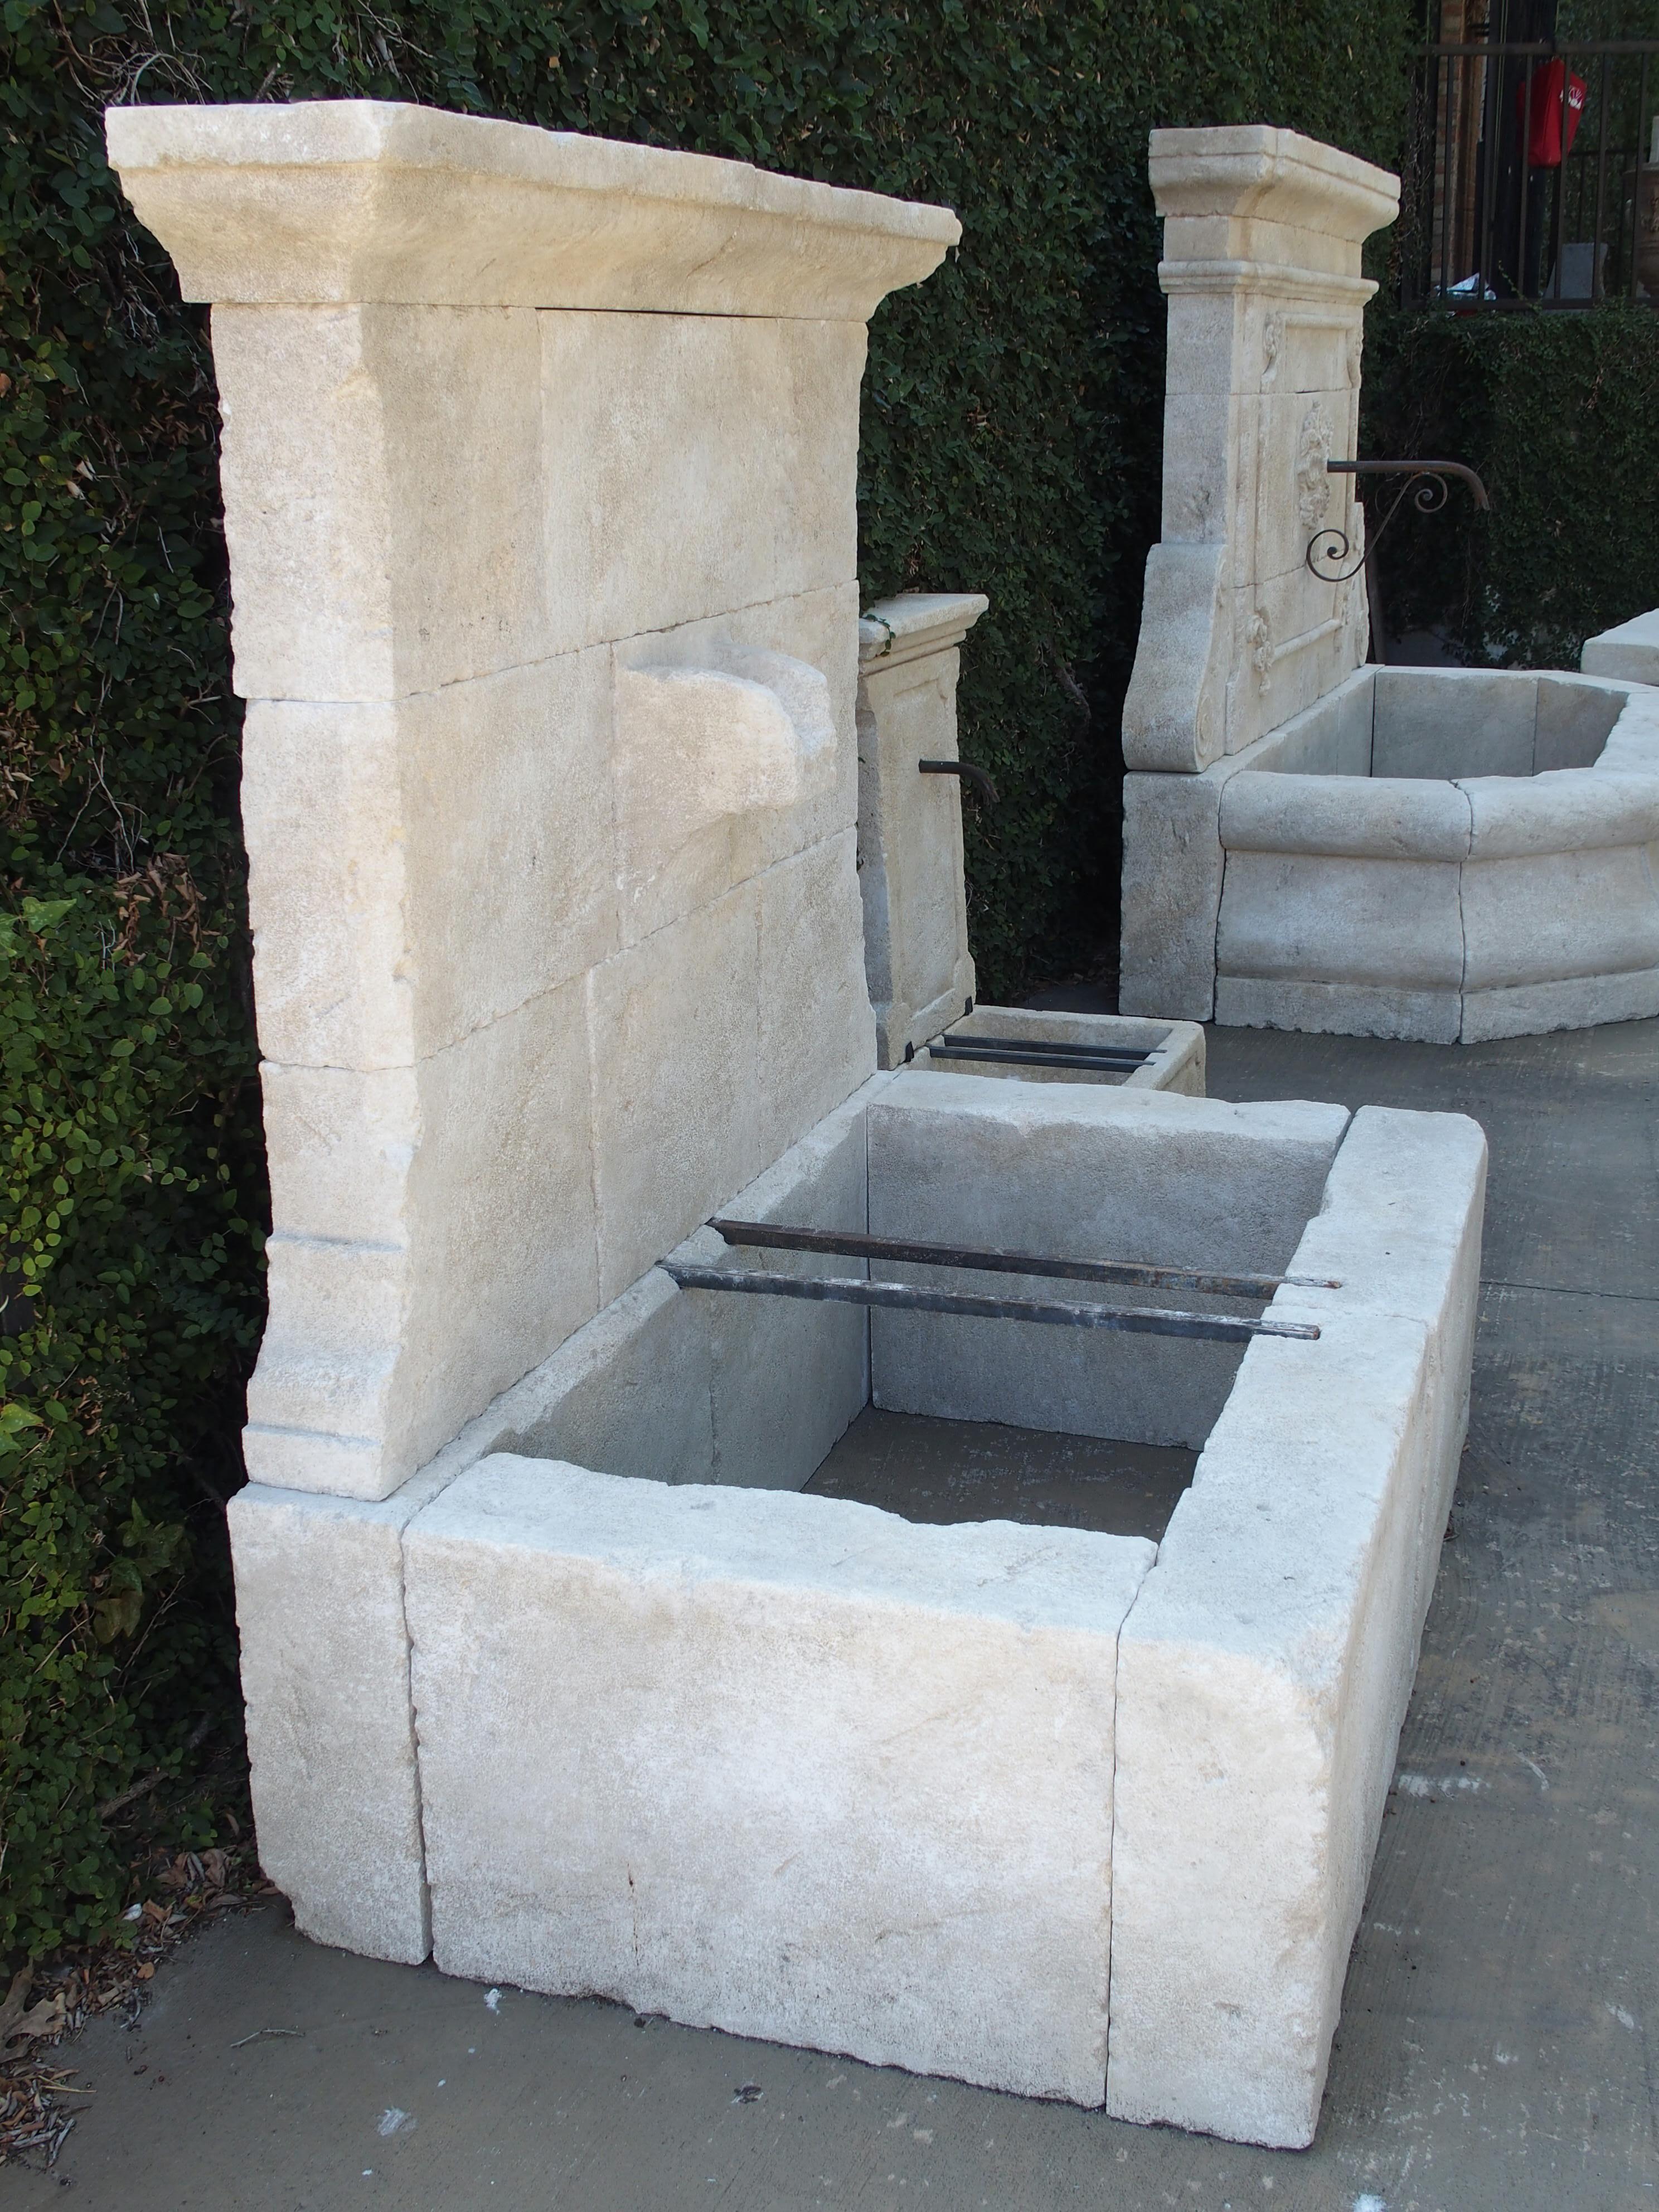 This French limestone wall fountain is a good in-between size at roughly 5 feet high and 5 feet wide. The overall shape is rectilinear, and it comes with a unique carved stone spout. The design works equally well with classic or contemporary